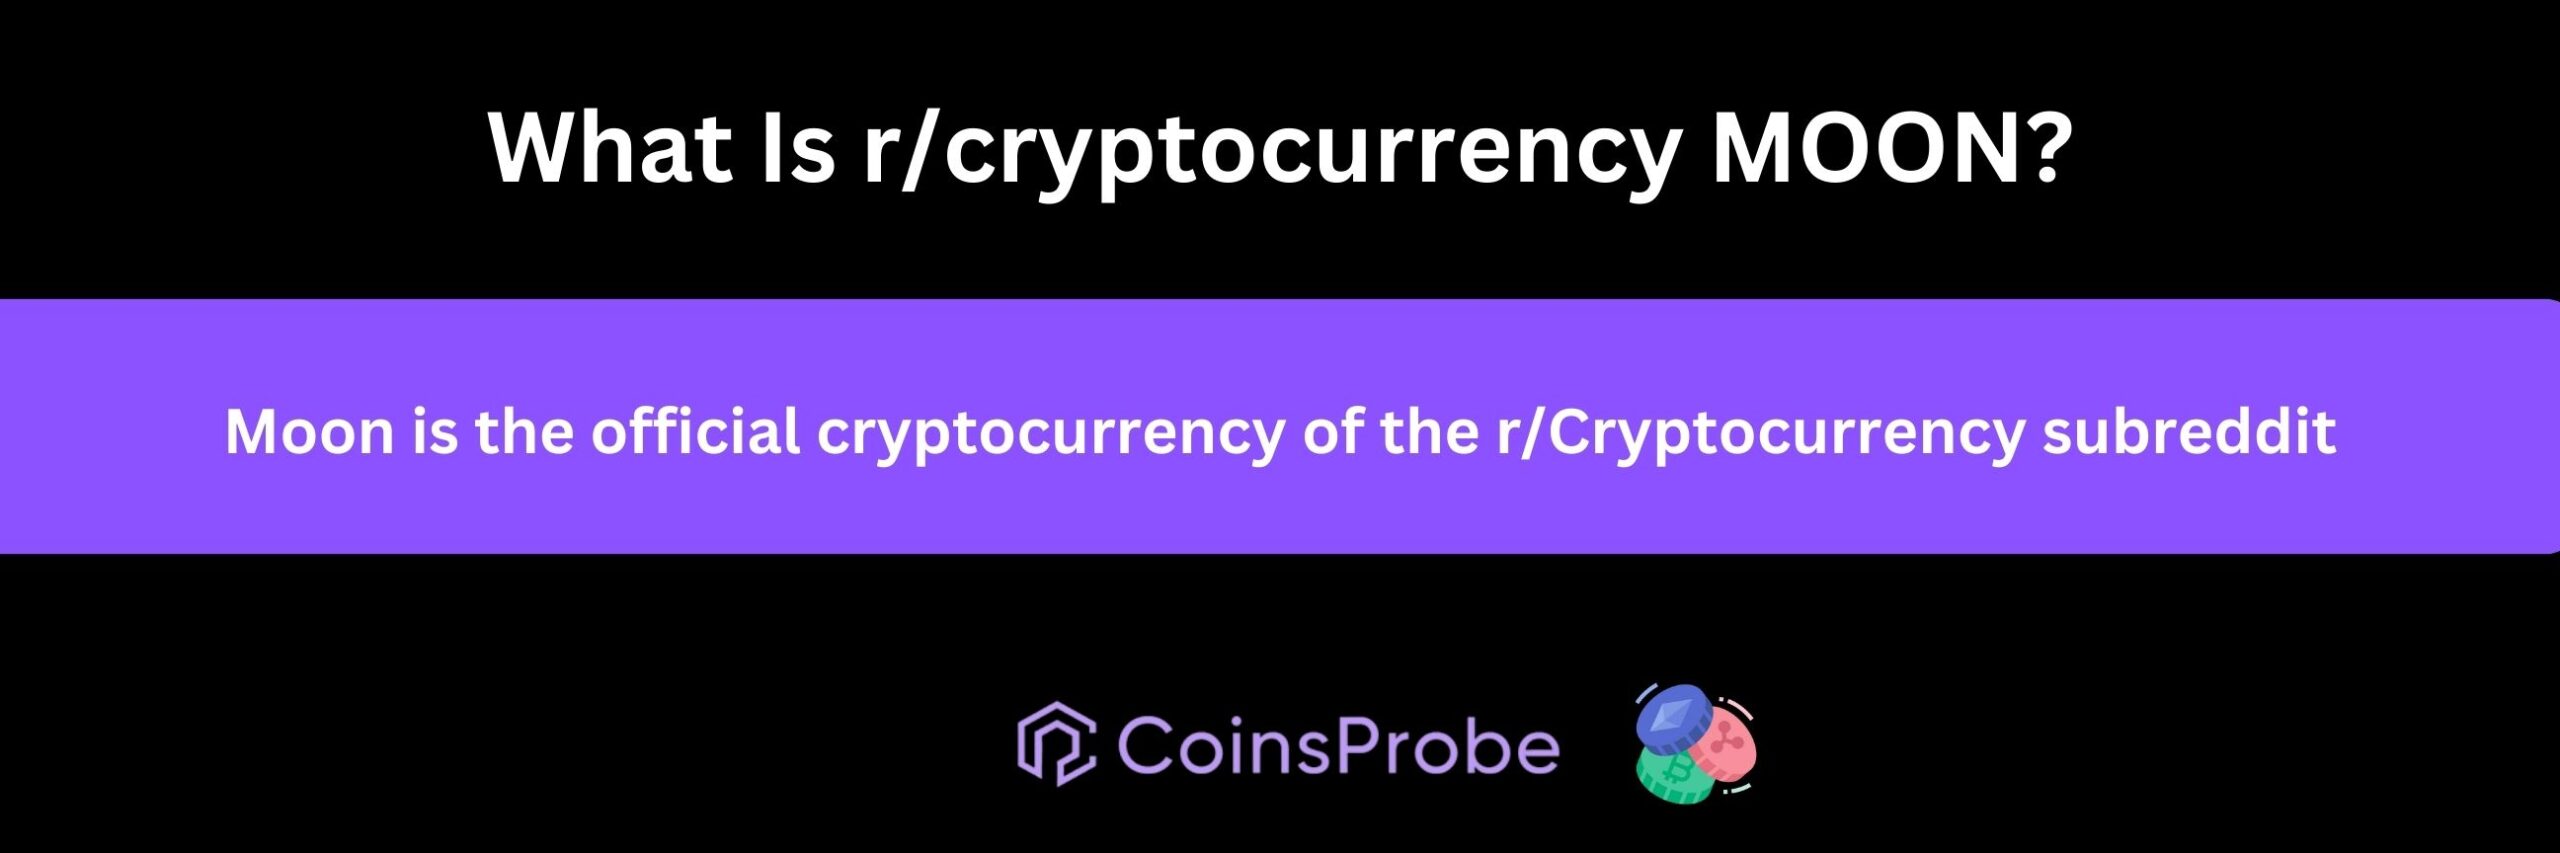 WHAT IS R/CRYPTOCURRENCY